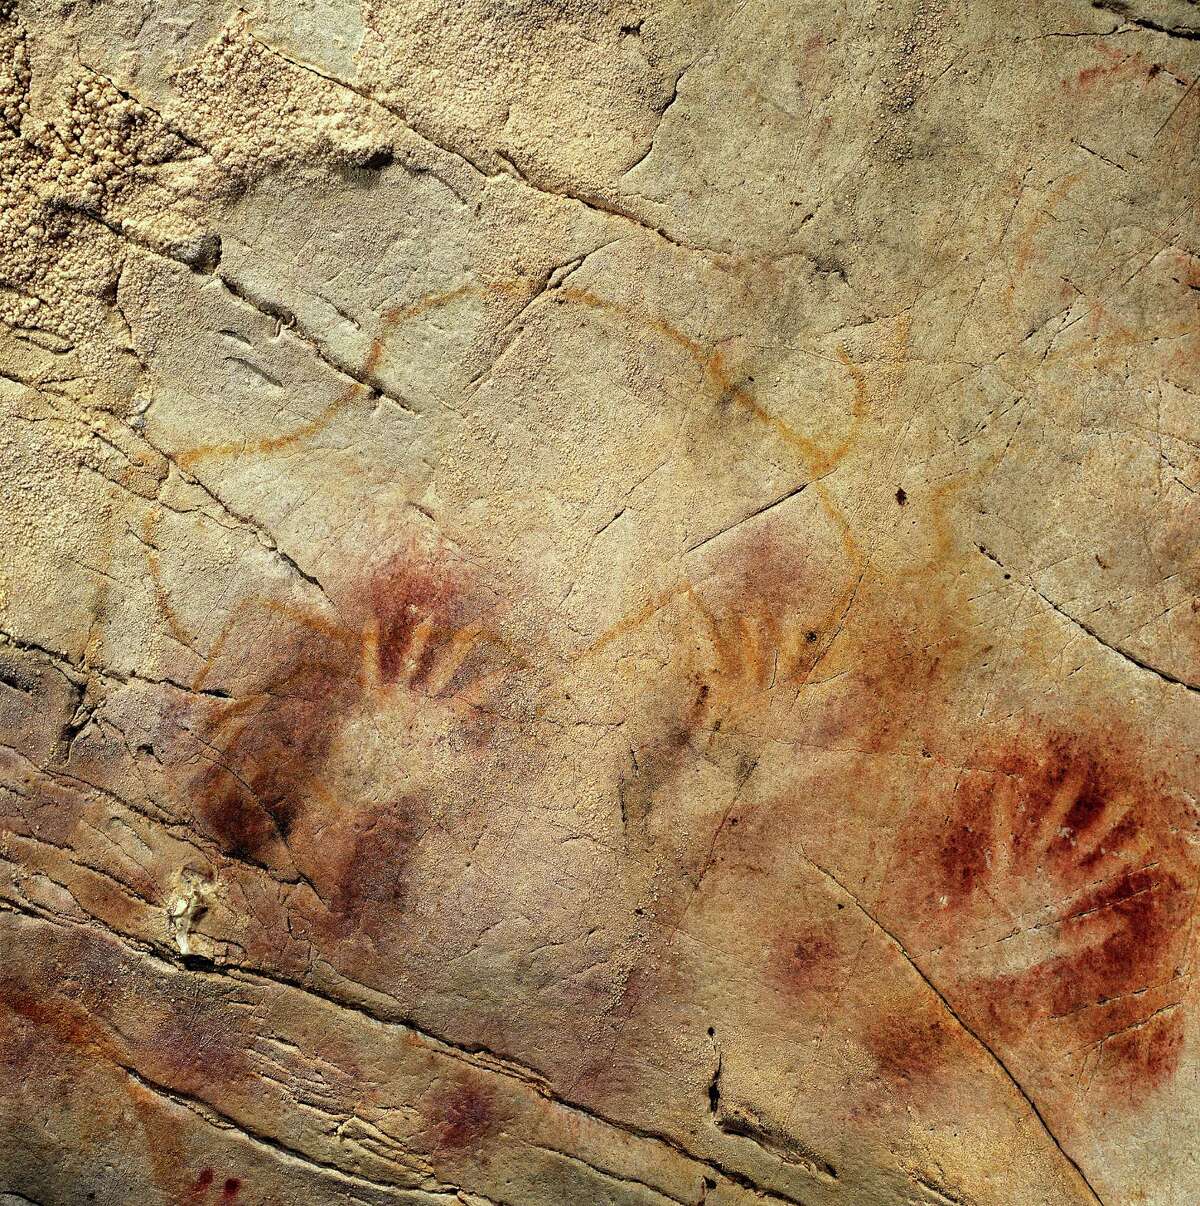 This undated handout photo provided by pedro suara/aaas shows detail of the 'Panel of Hands', El Castillo Cave, Spain, showing red disks and hand stencils made by blowing or spitting paint onto the wall. A date from a disk shows the painting to be older than 40,800 years making it the oldest known cave art in Europe. The bison overlies the hands and is therefore painted later. New tests show that crude Spanish cave paintings of a red sphere and handprints are the oldest in the world, so ancient they may not have been by modern man. They might have even been made by the much-maligned Neanderthals, some scientists suggest but others disagree. (AP Photo/Pedro Saura, AAAS)